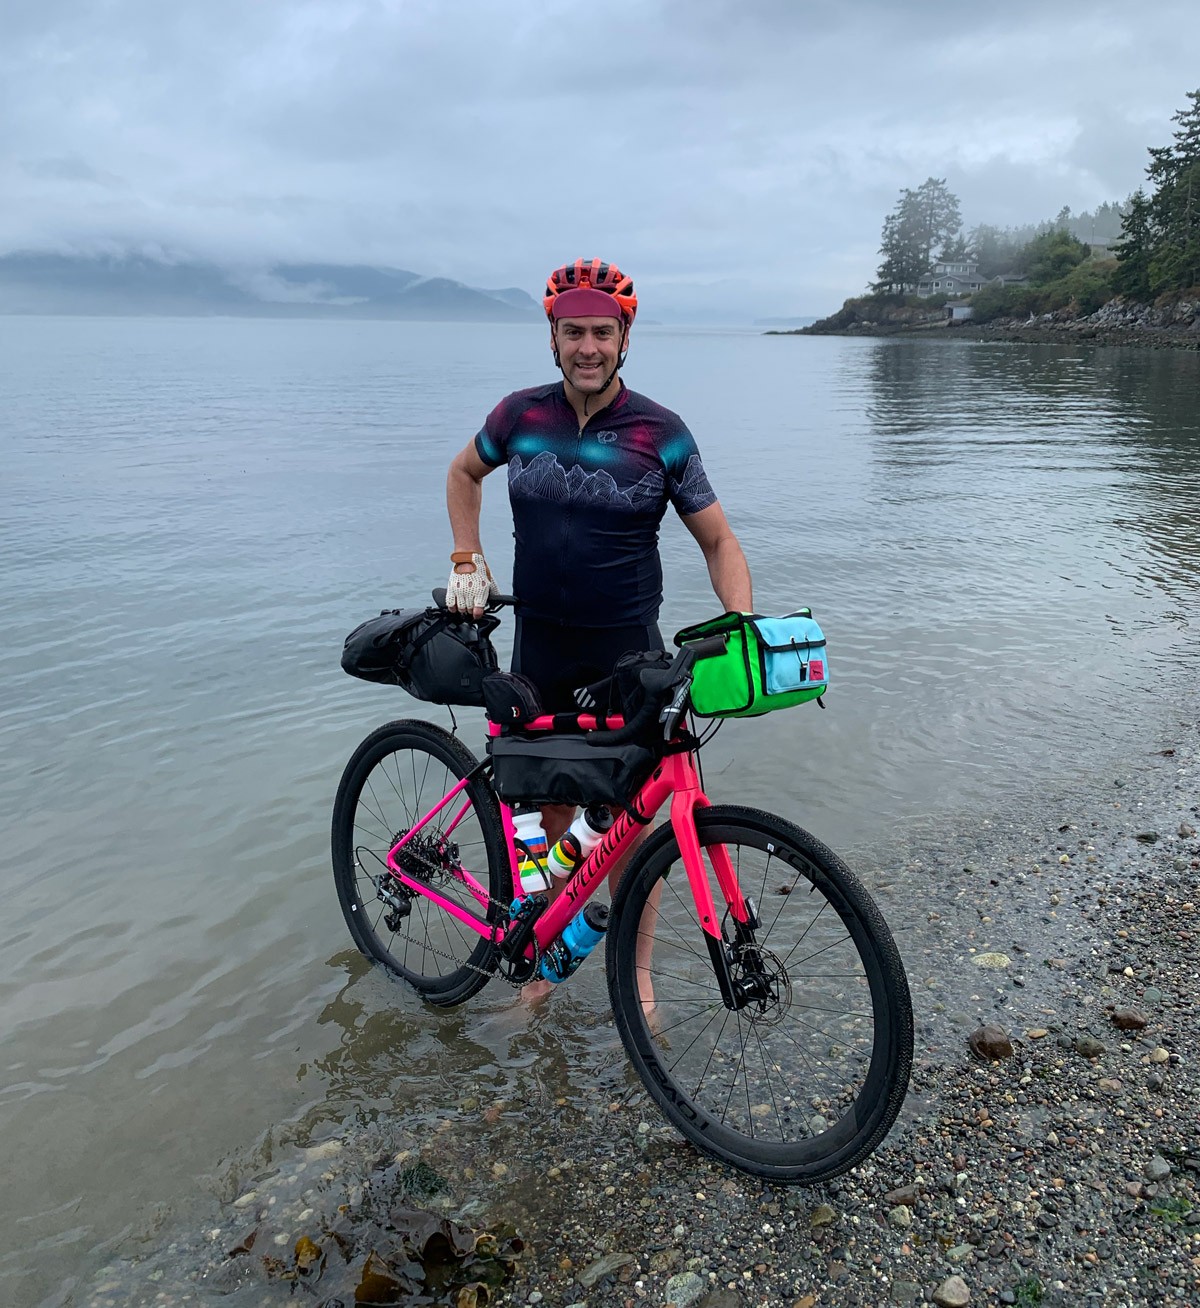 Rob Lea standing with bike in Pacific Ocean prior to starting Ride Across America.